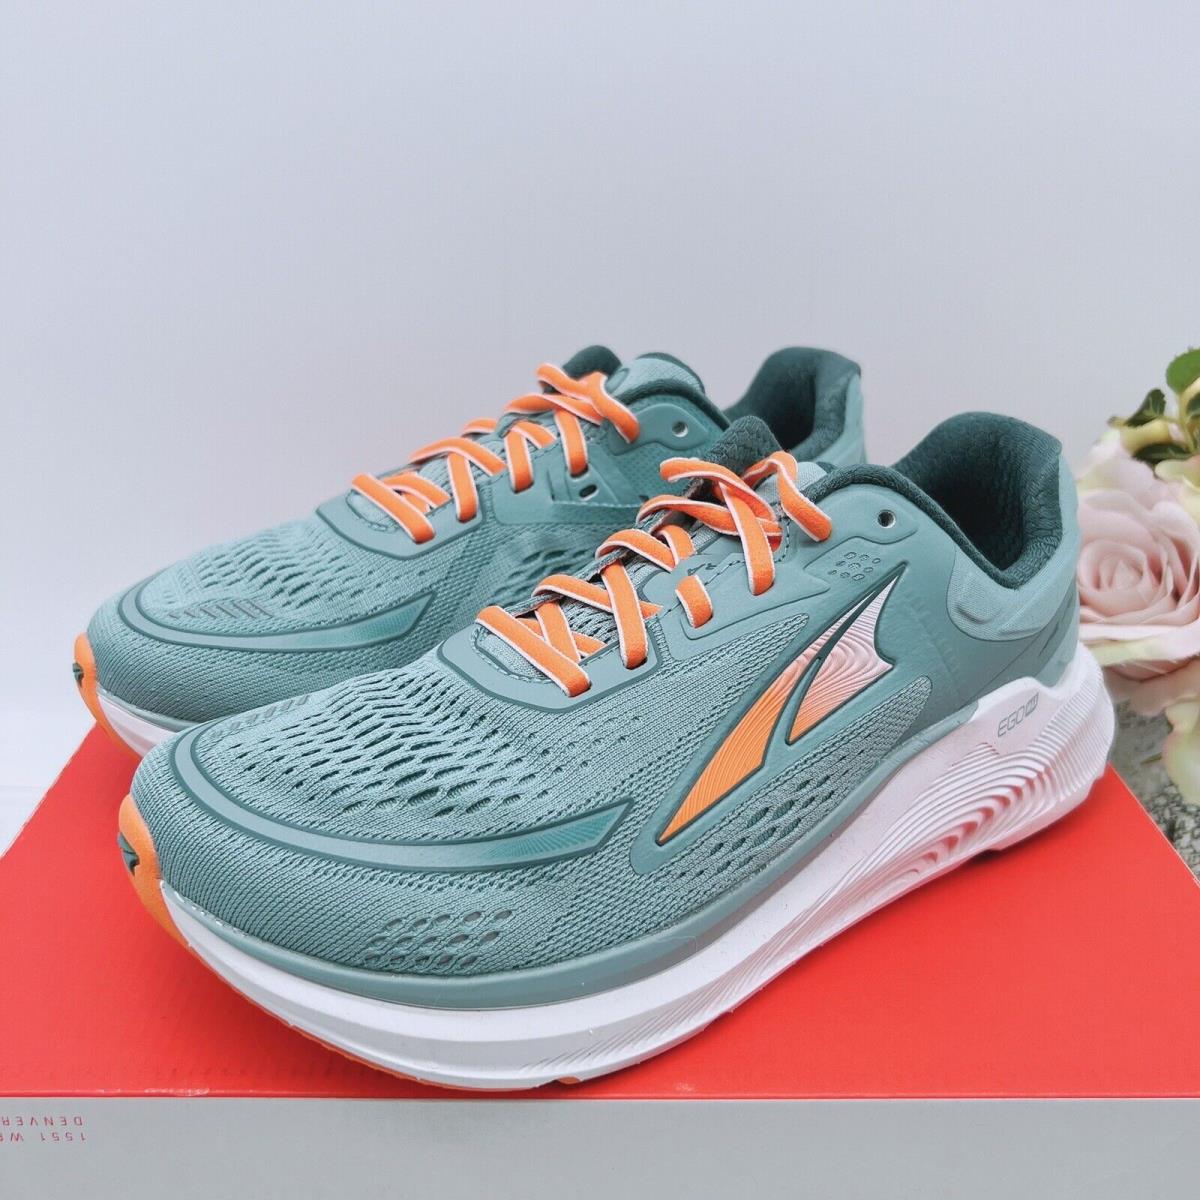 Altra Footwear Paradigm 6 Road Running Shoes Dusty Teal Women s Size US 7 B